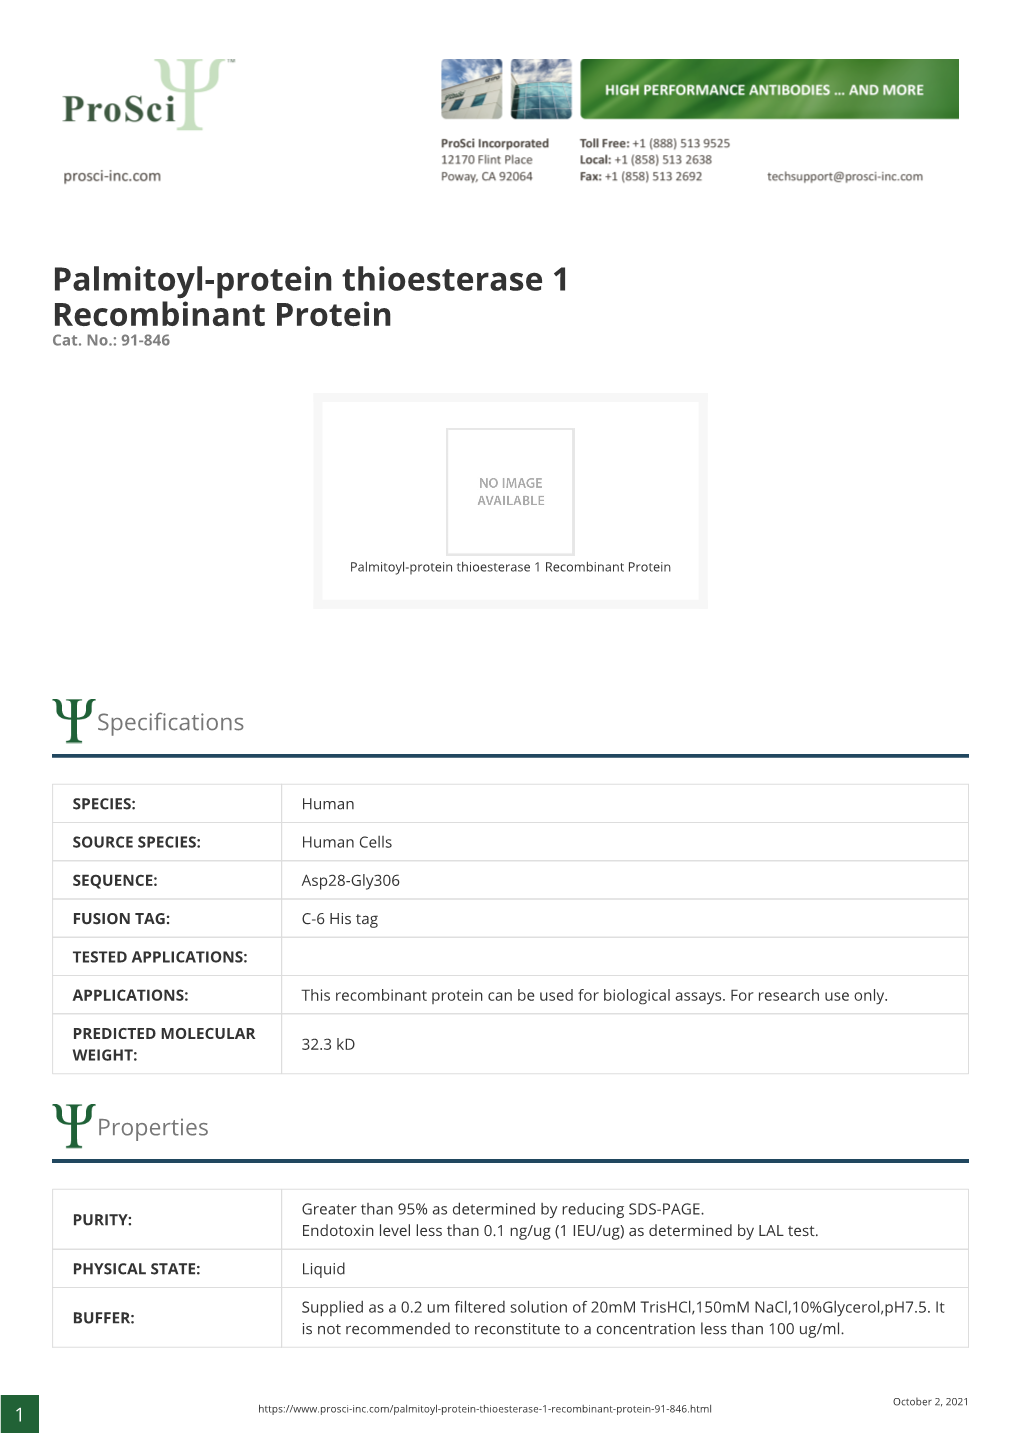 Palmitoyl-Protein Thioesterase 1 Recombinant Protein Cat